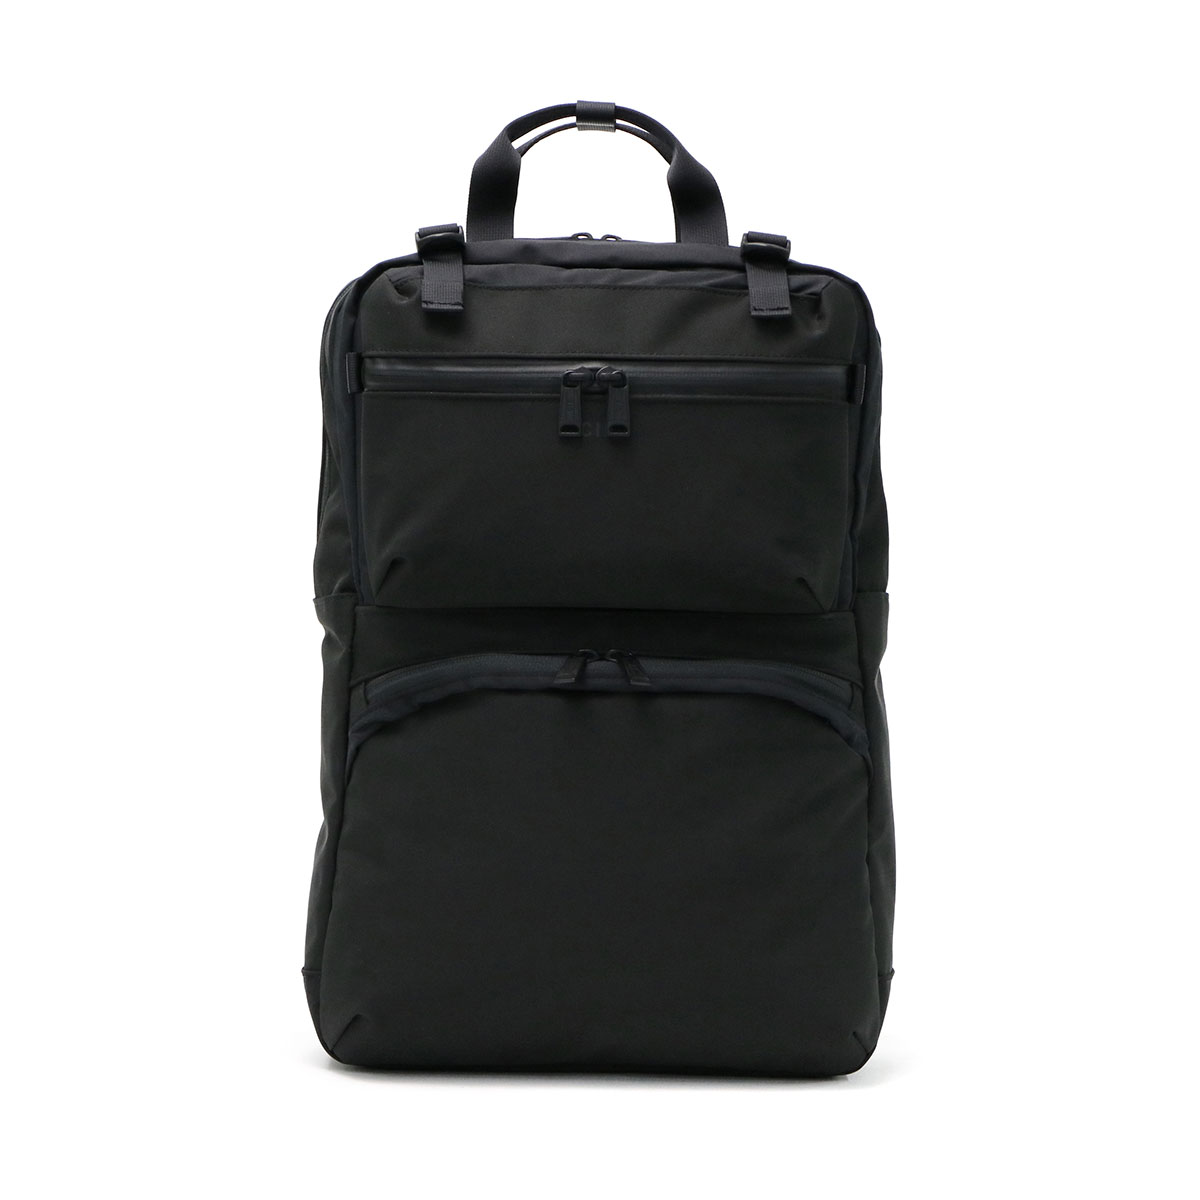 CIE シー SPREAD 2WAYBACKPACK バックパック 072000｜【正規販売店 